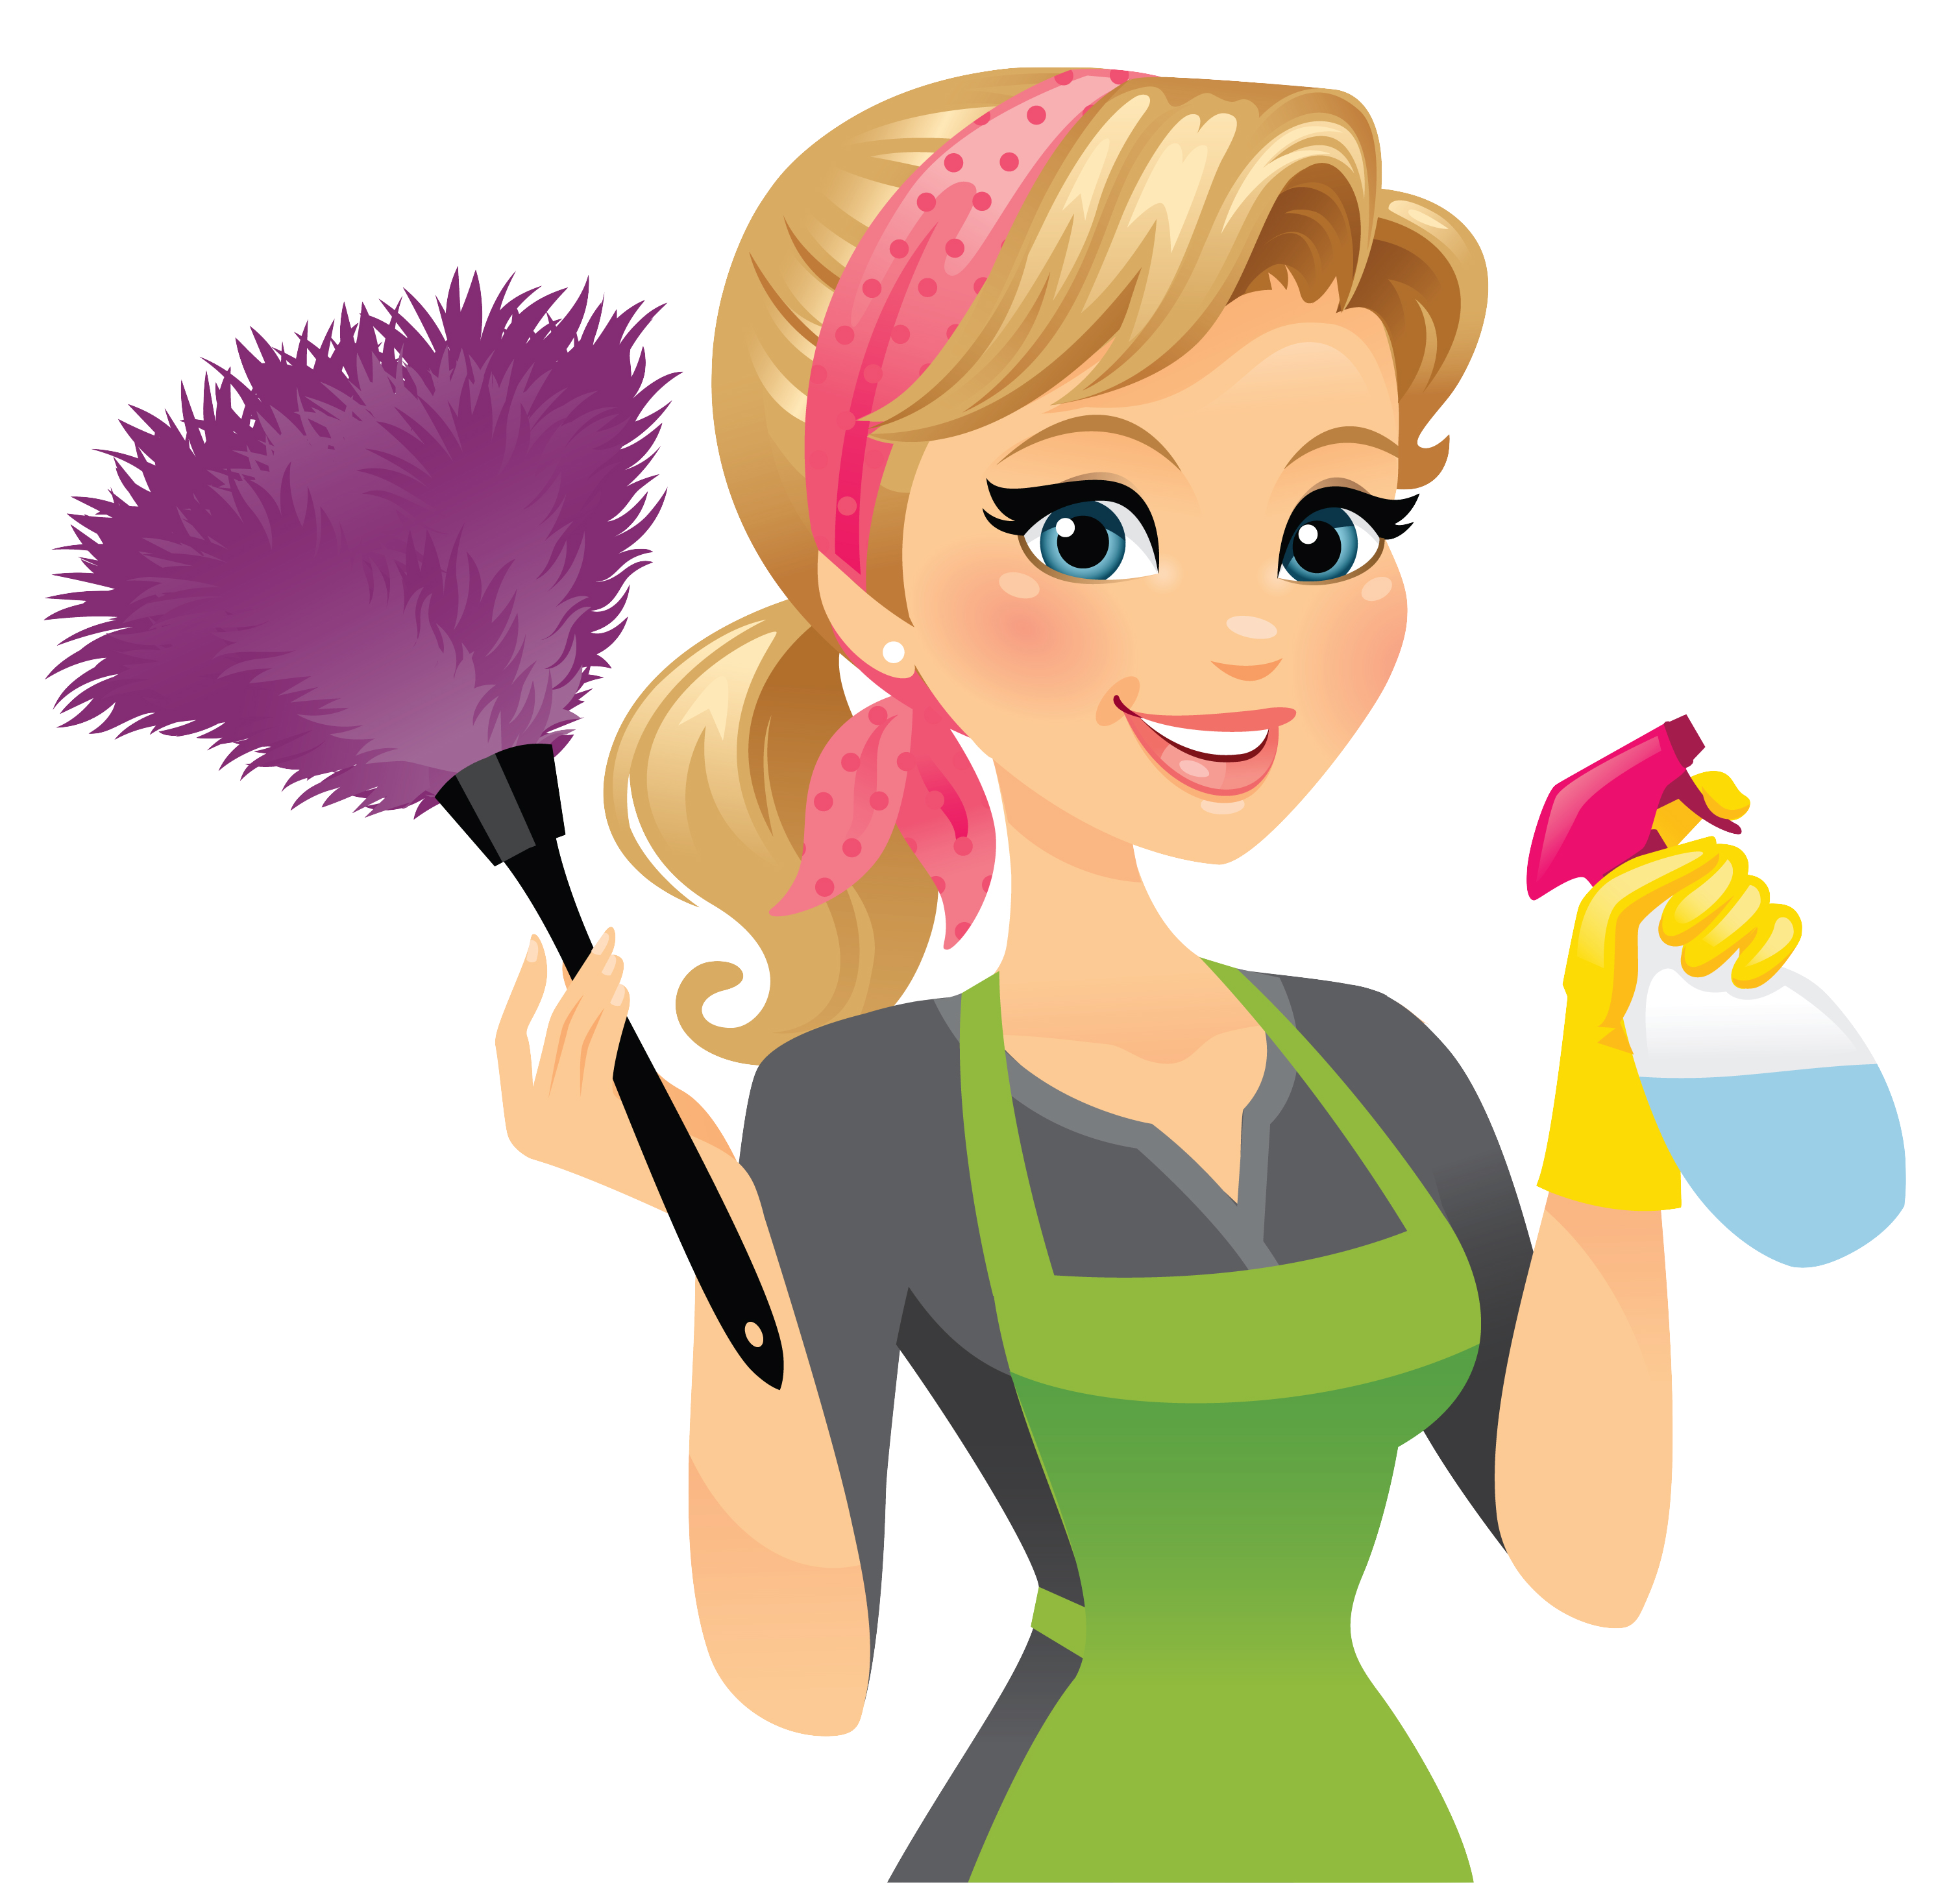 Picture #1371491 - housekeeping clipart clening. housekeeping clipart cleni...